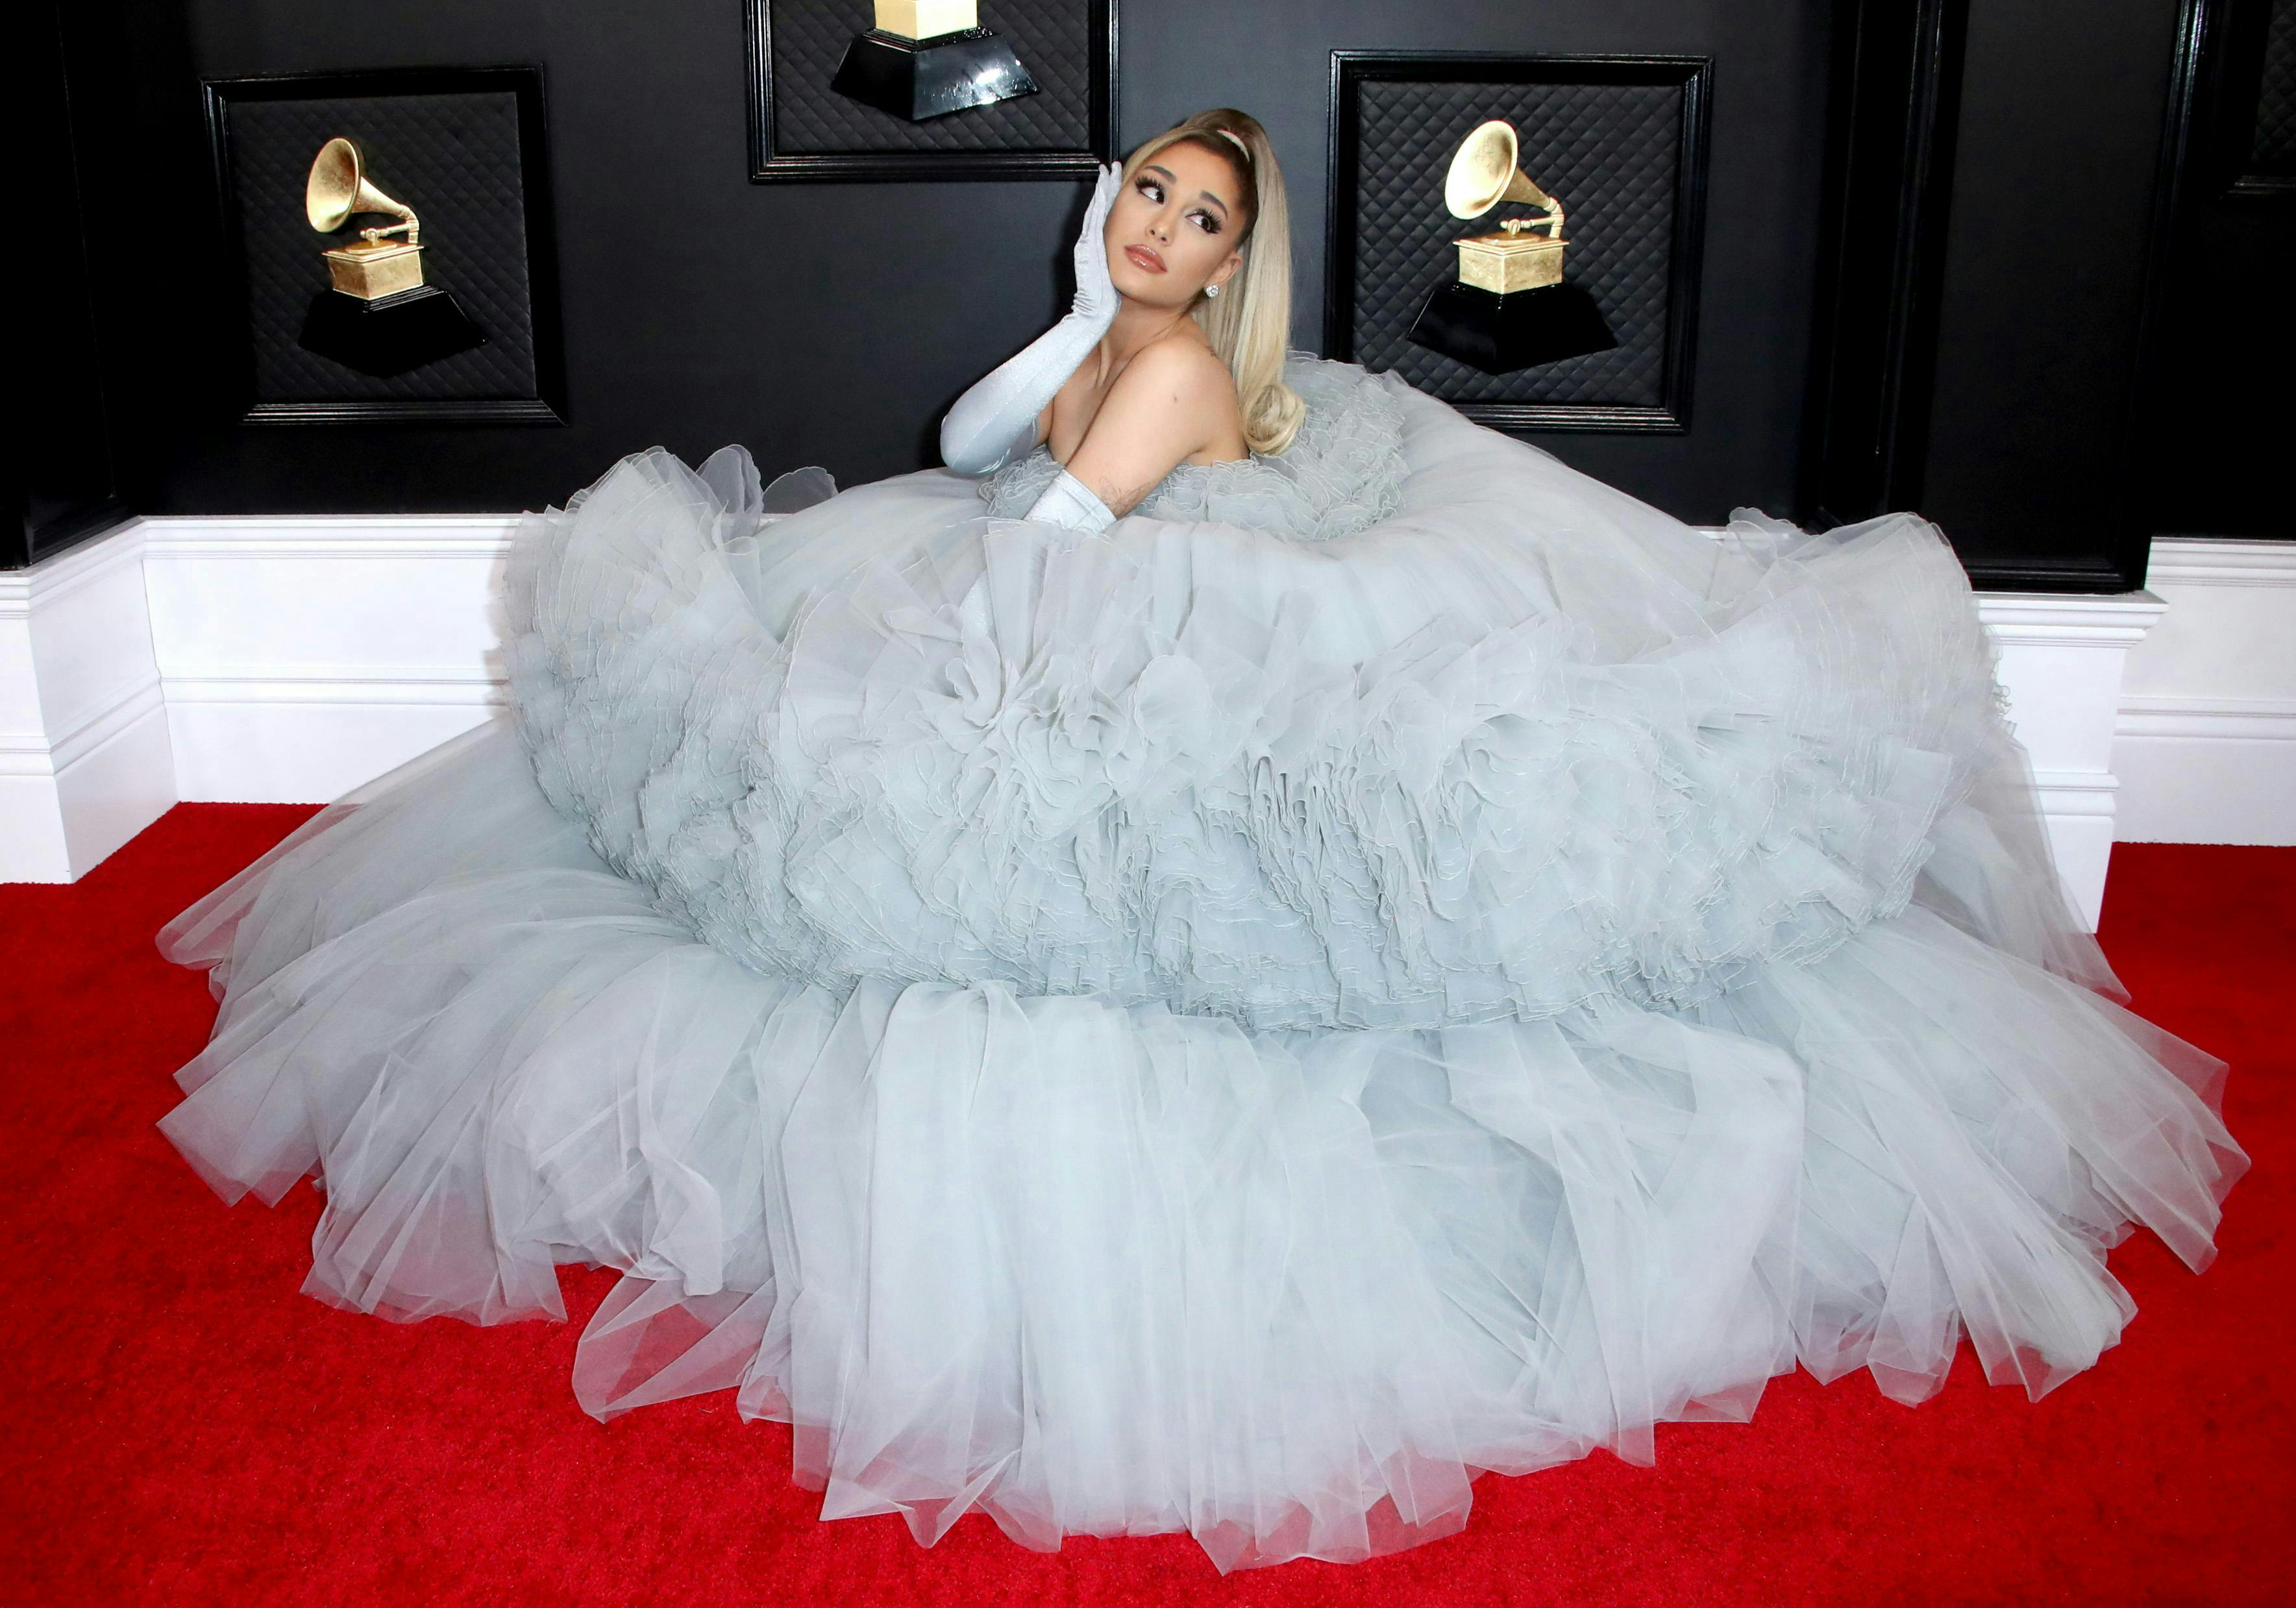 62nd annual grammy awards arrivals los angeles usa 26 jan 2020 ariana grande grammys music actor female personality 86814833 fashion clothing apparel evening dress gown robe person human wedding gown wedding